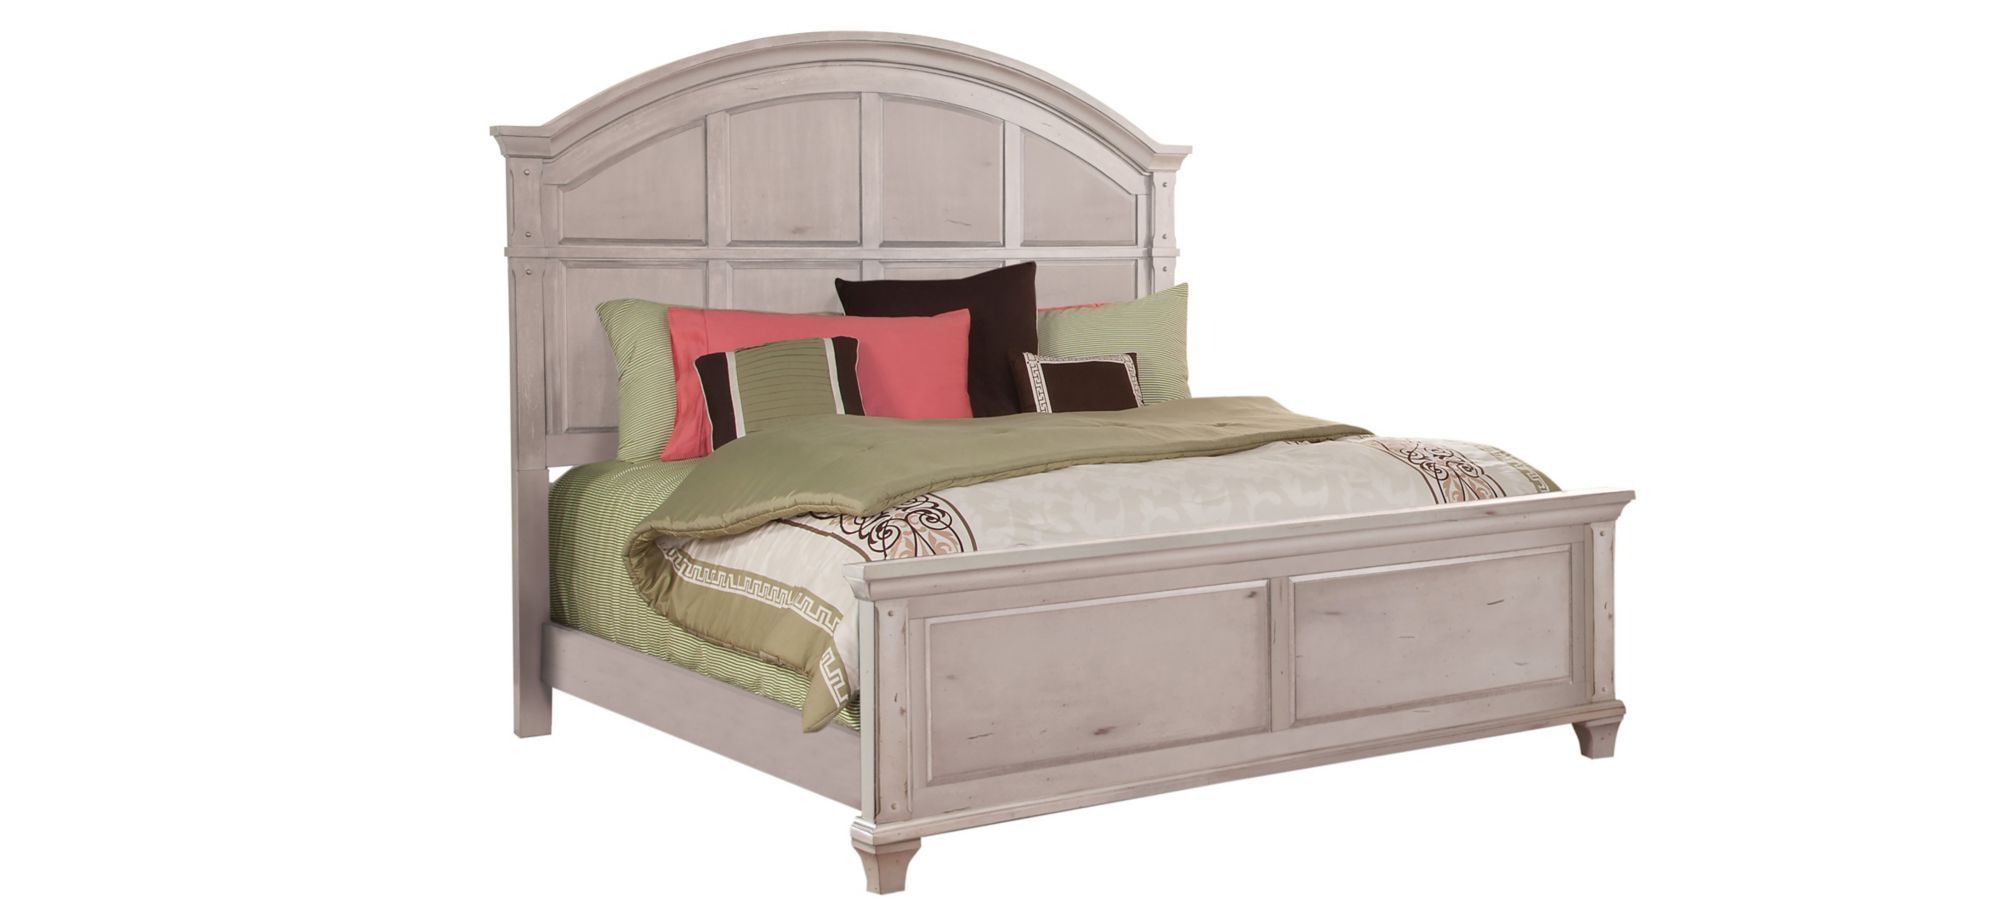 Sedona Queen Panel Bed in White by American Woodcrafters